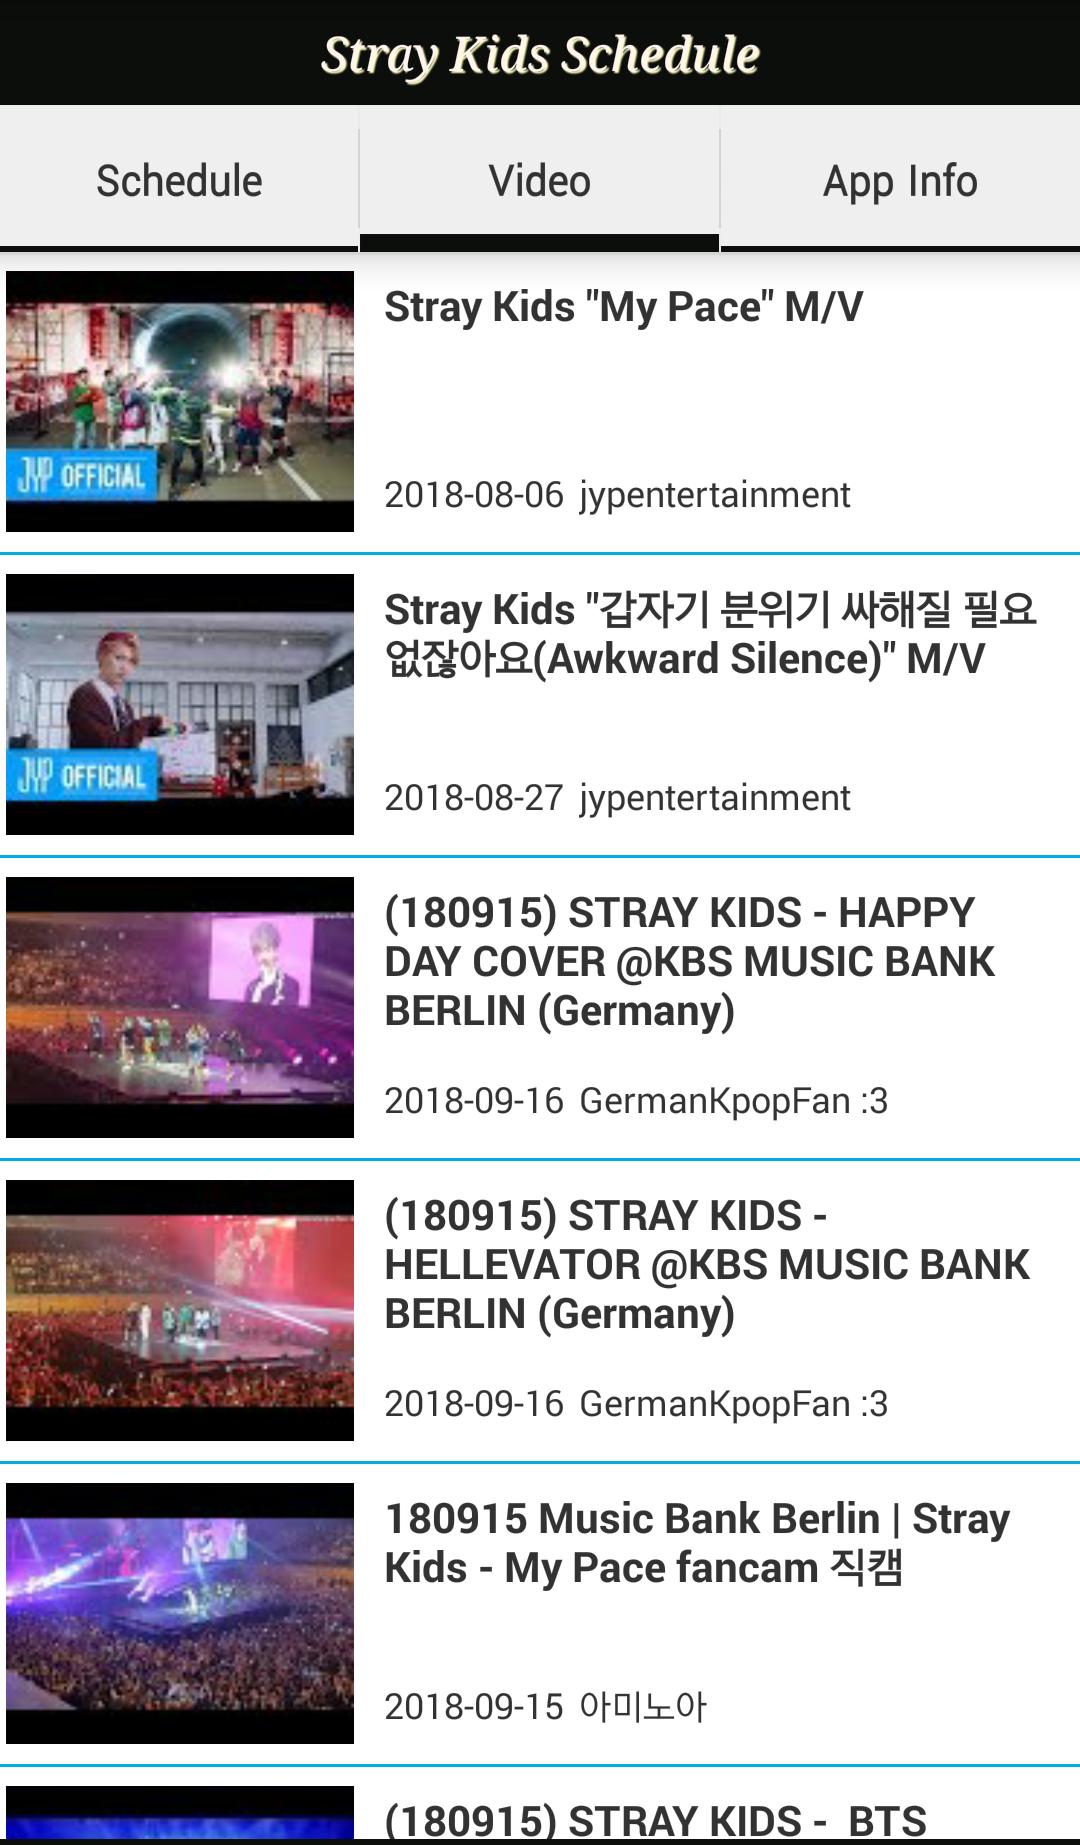 Stray Kids Schedule For Android Apk Download - roblox hellevator updated youtube